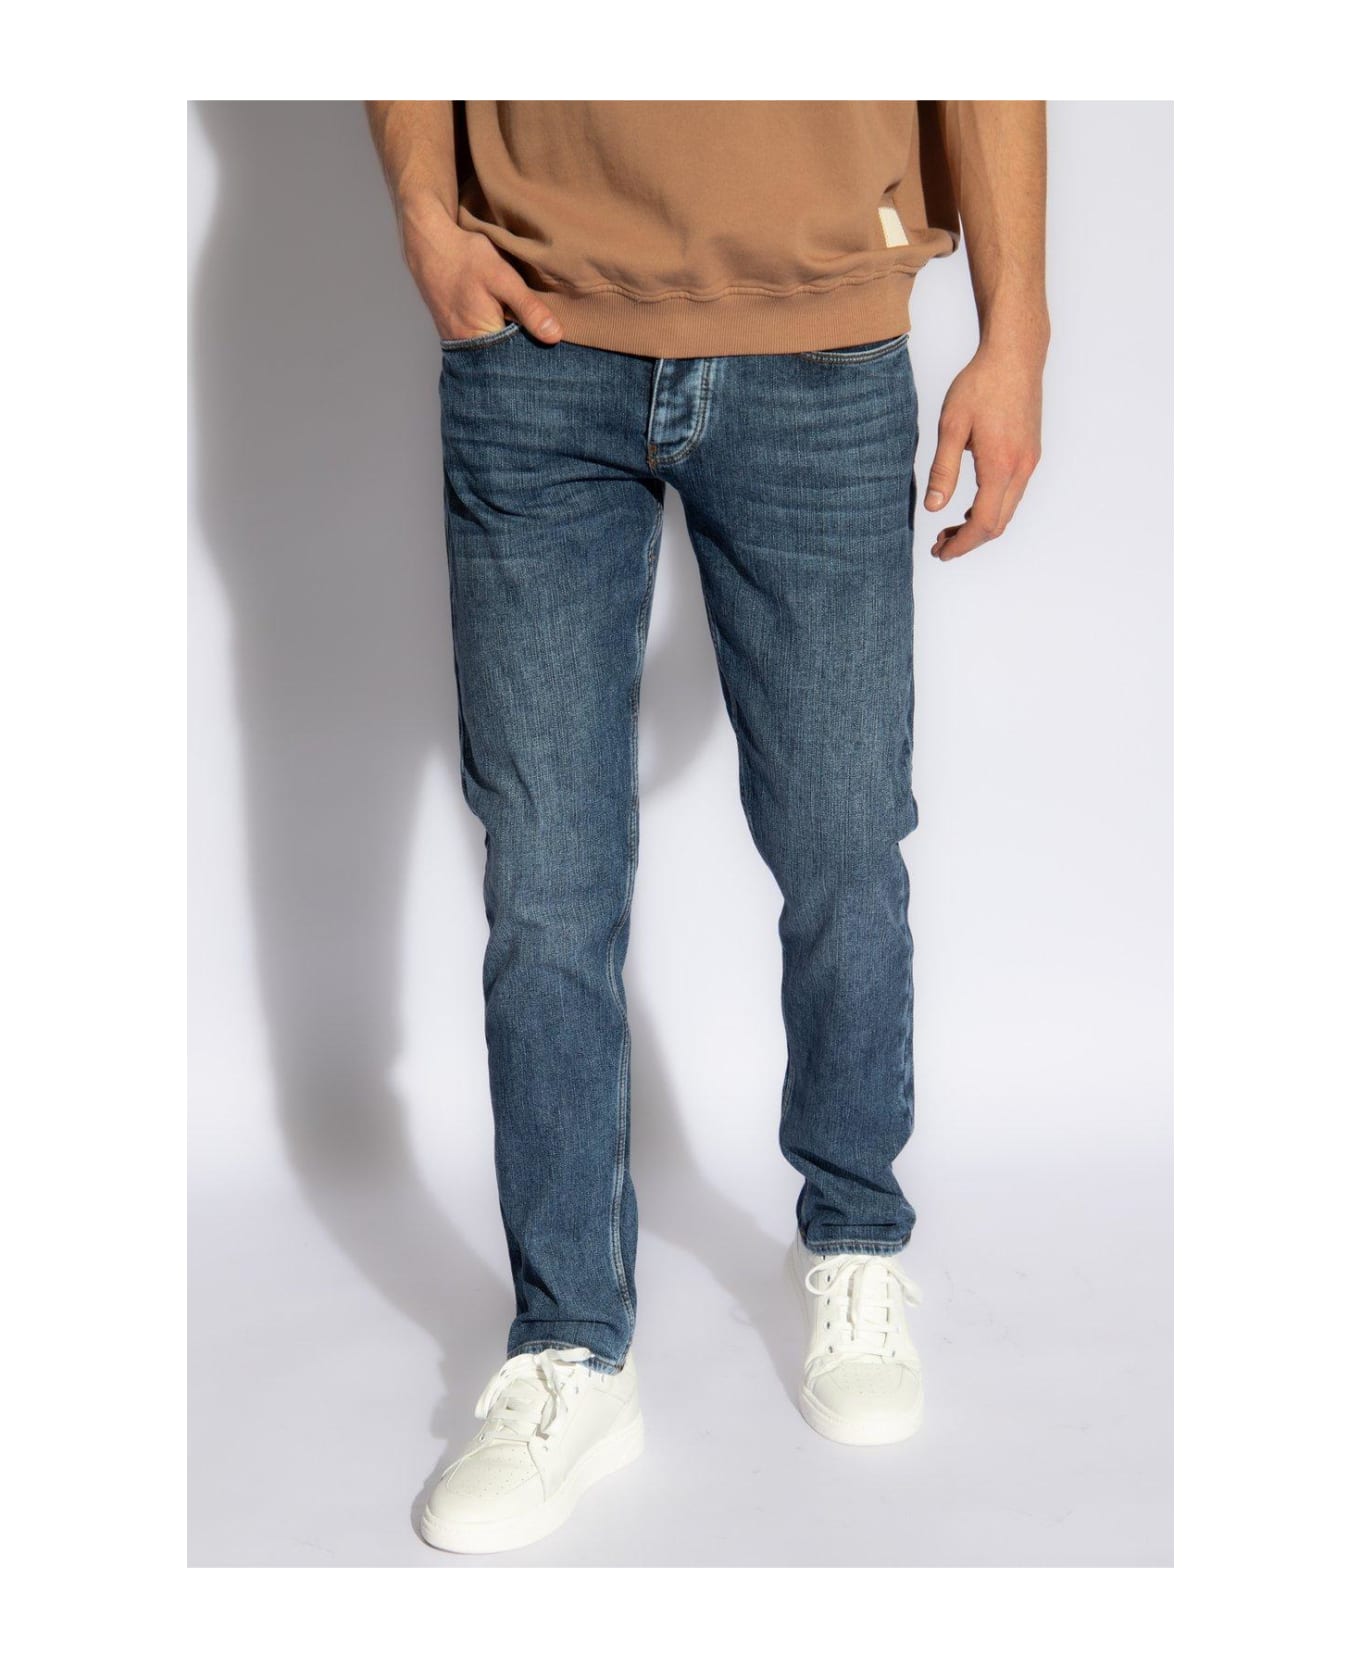 Emporio Armani Jeans With Tapered Legs - Blue デニム